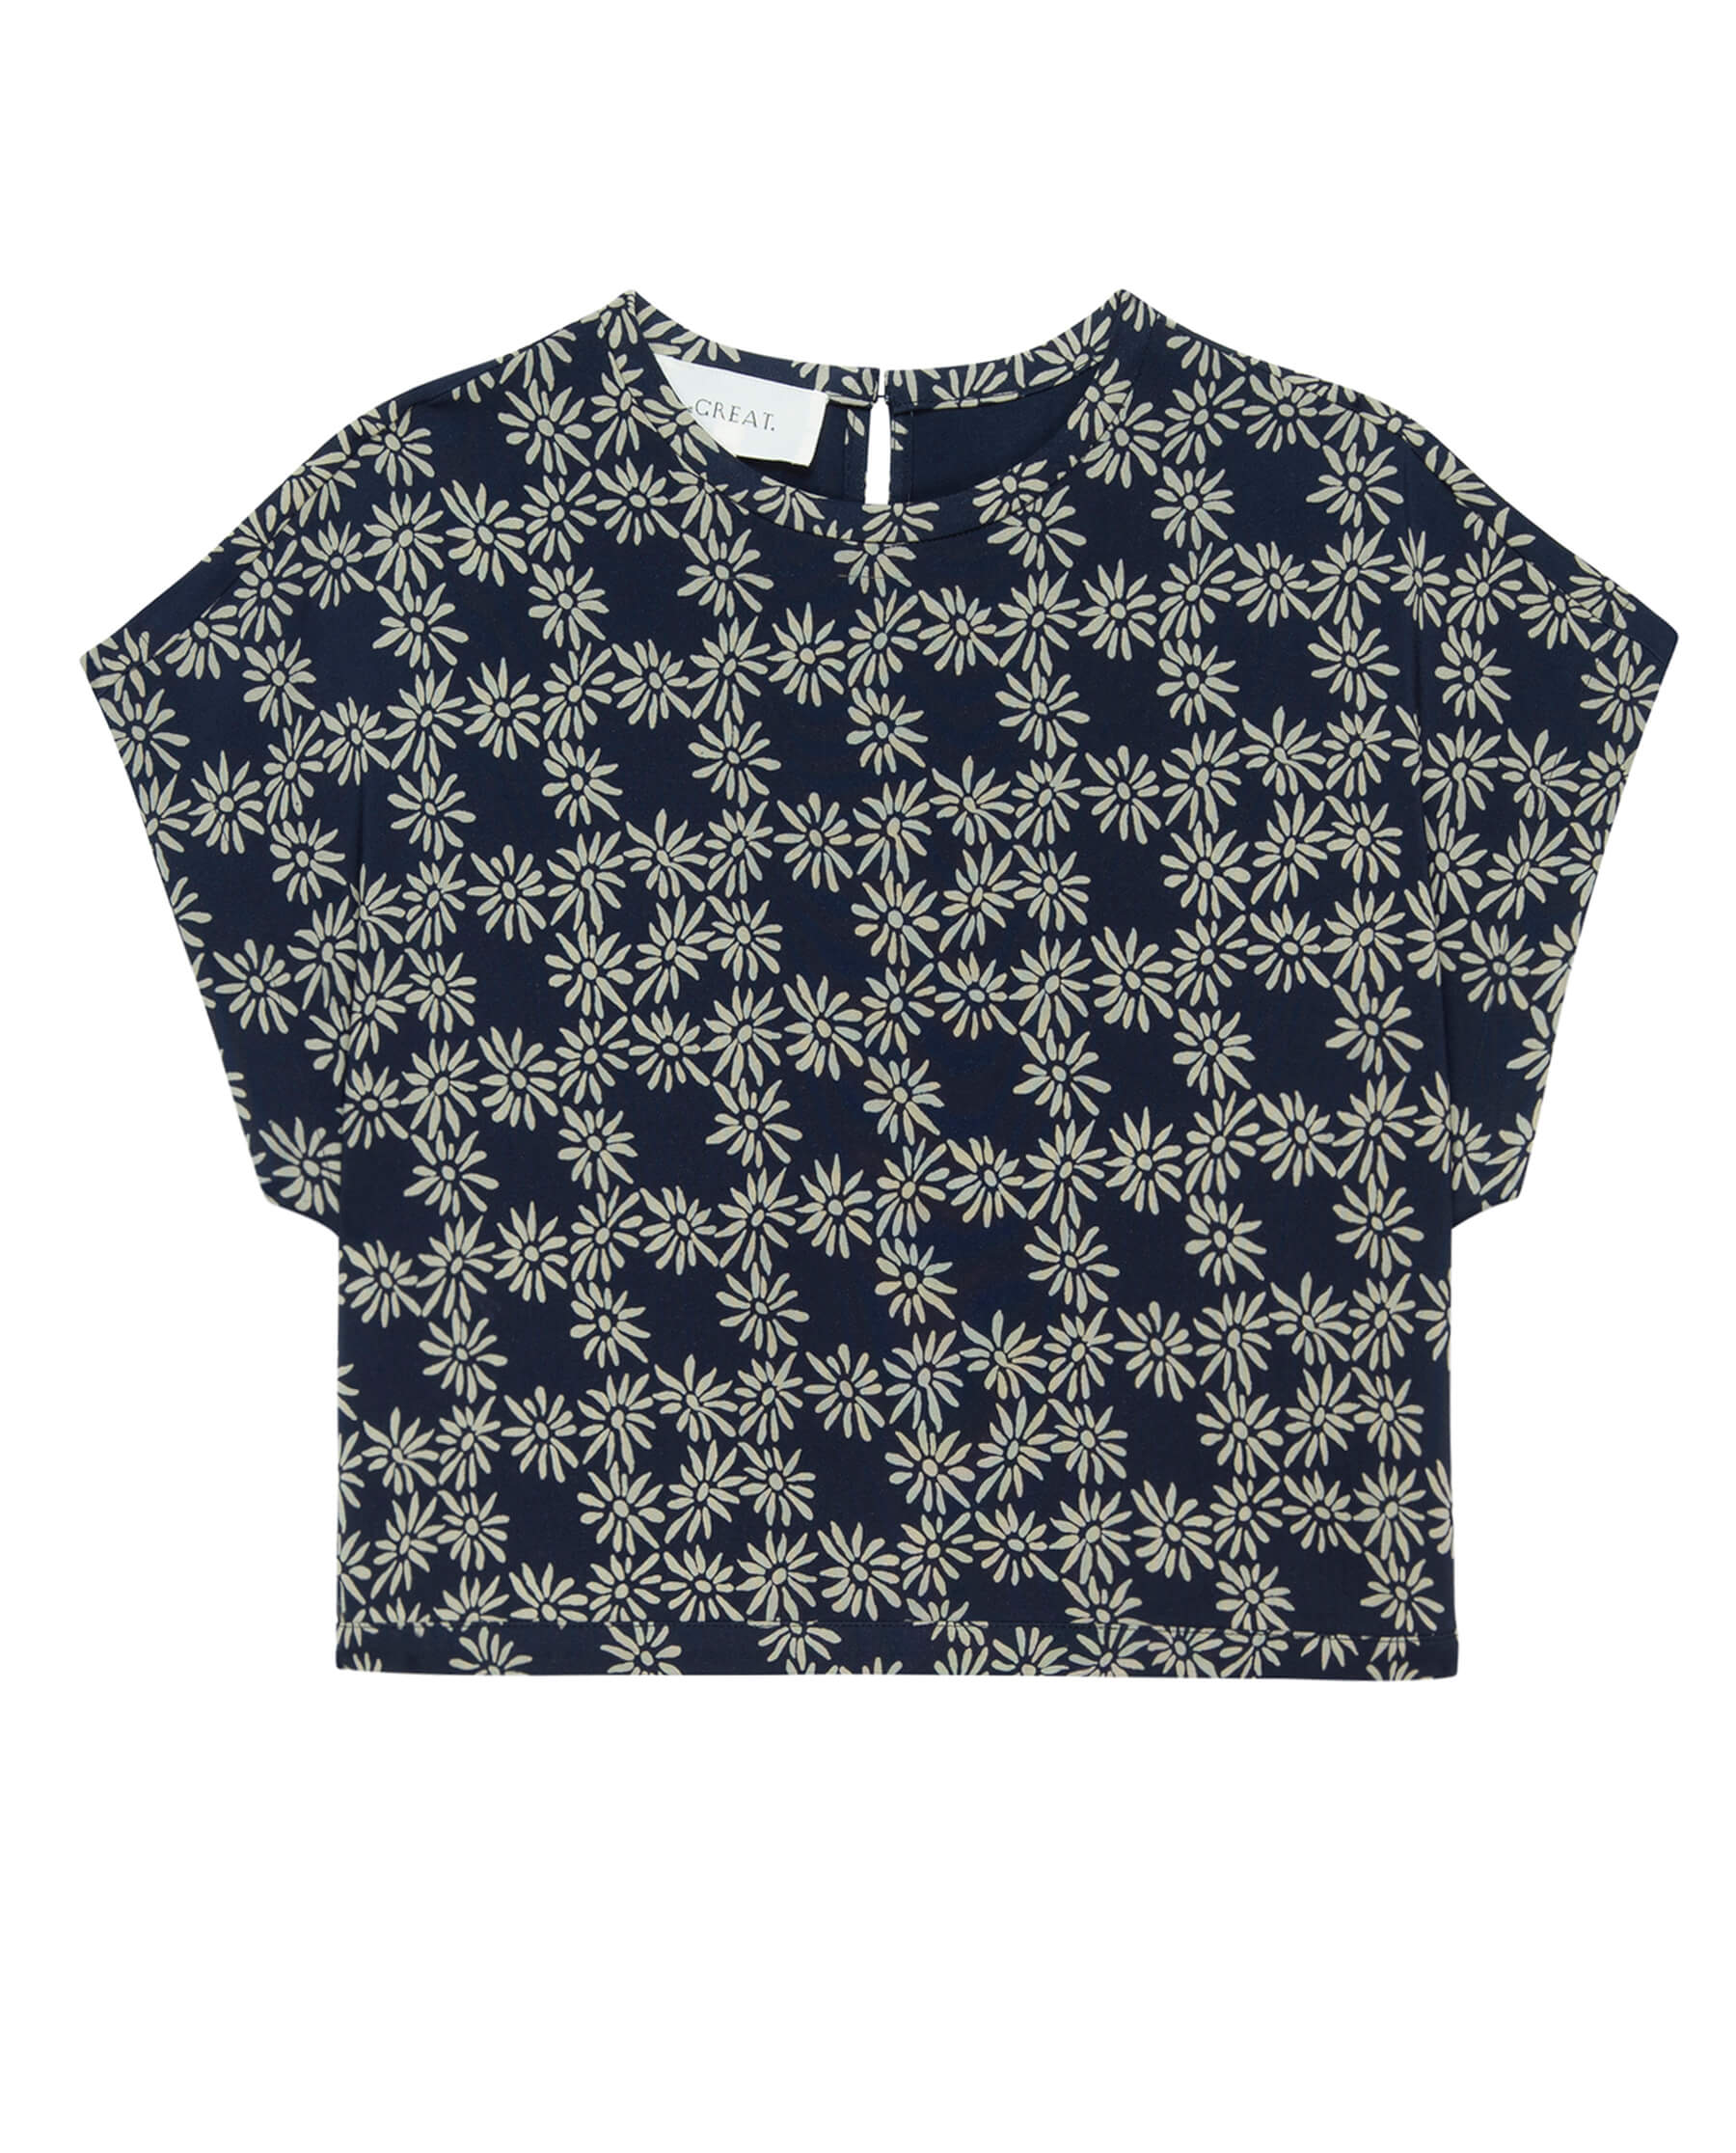 The Wander Top. -- Navy Scattered Daisy